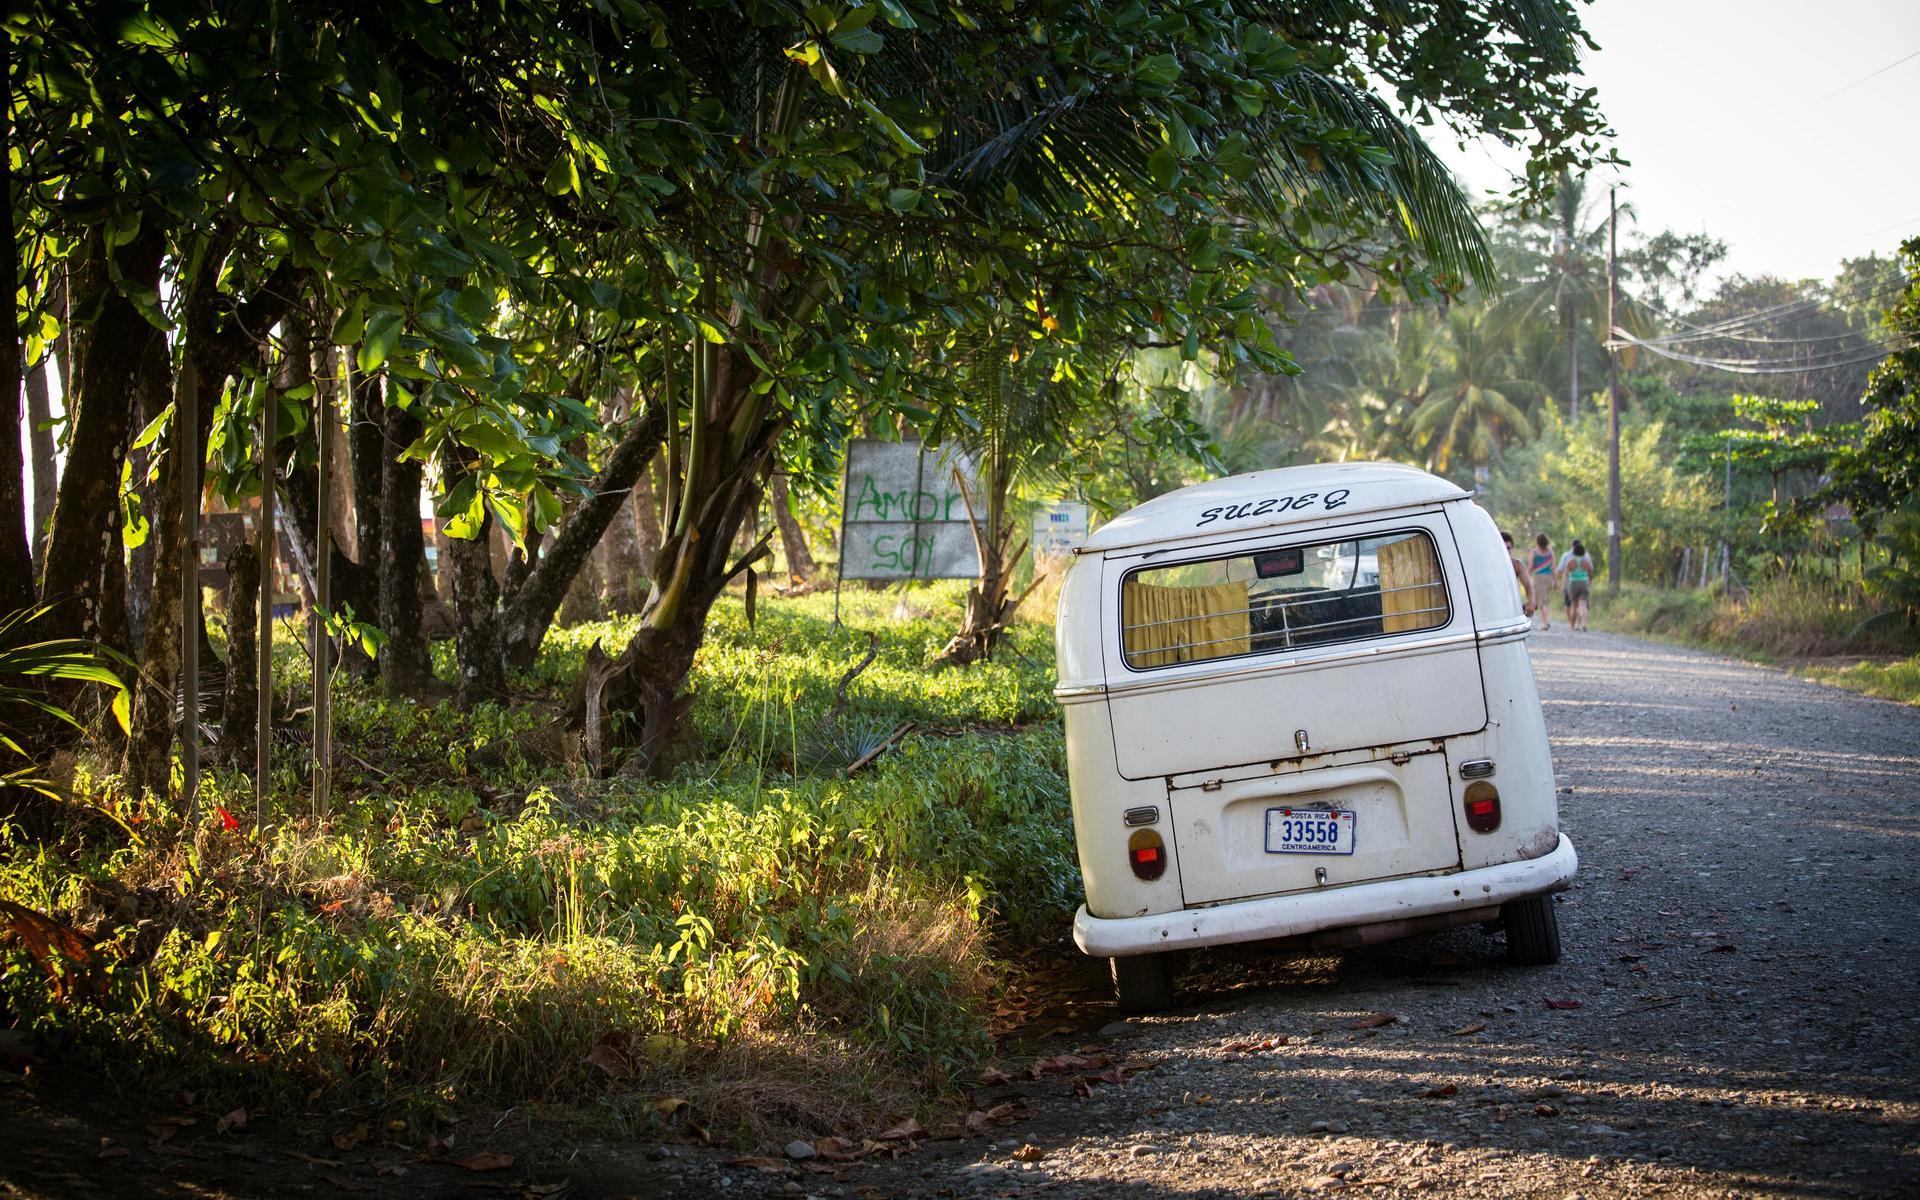 500px Photo ID: 65375367 - A surf board, van, and sun is all you need on the west coast of Costa Rica!